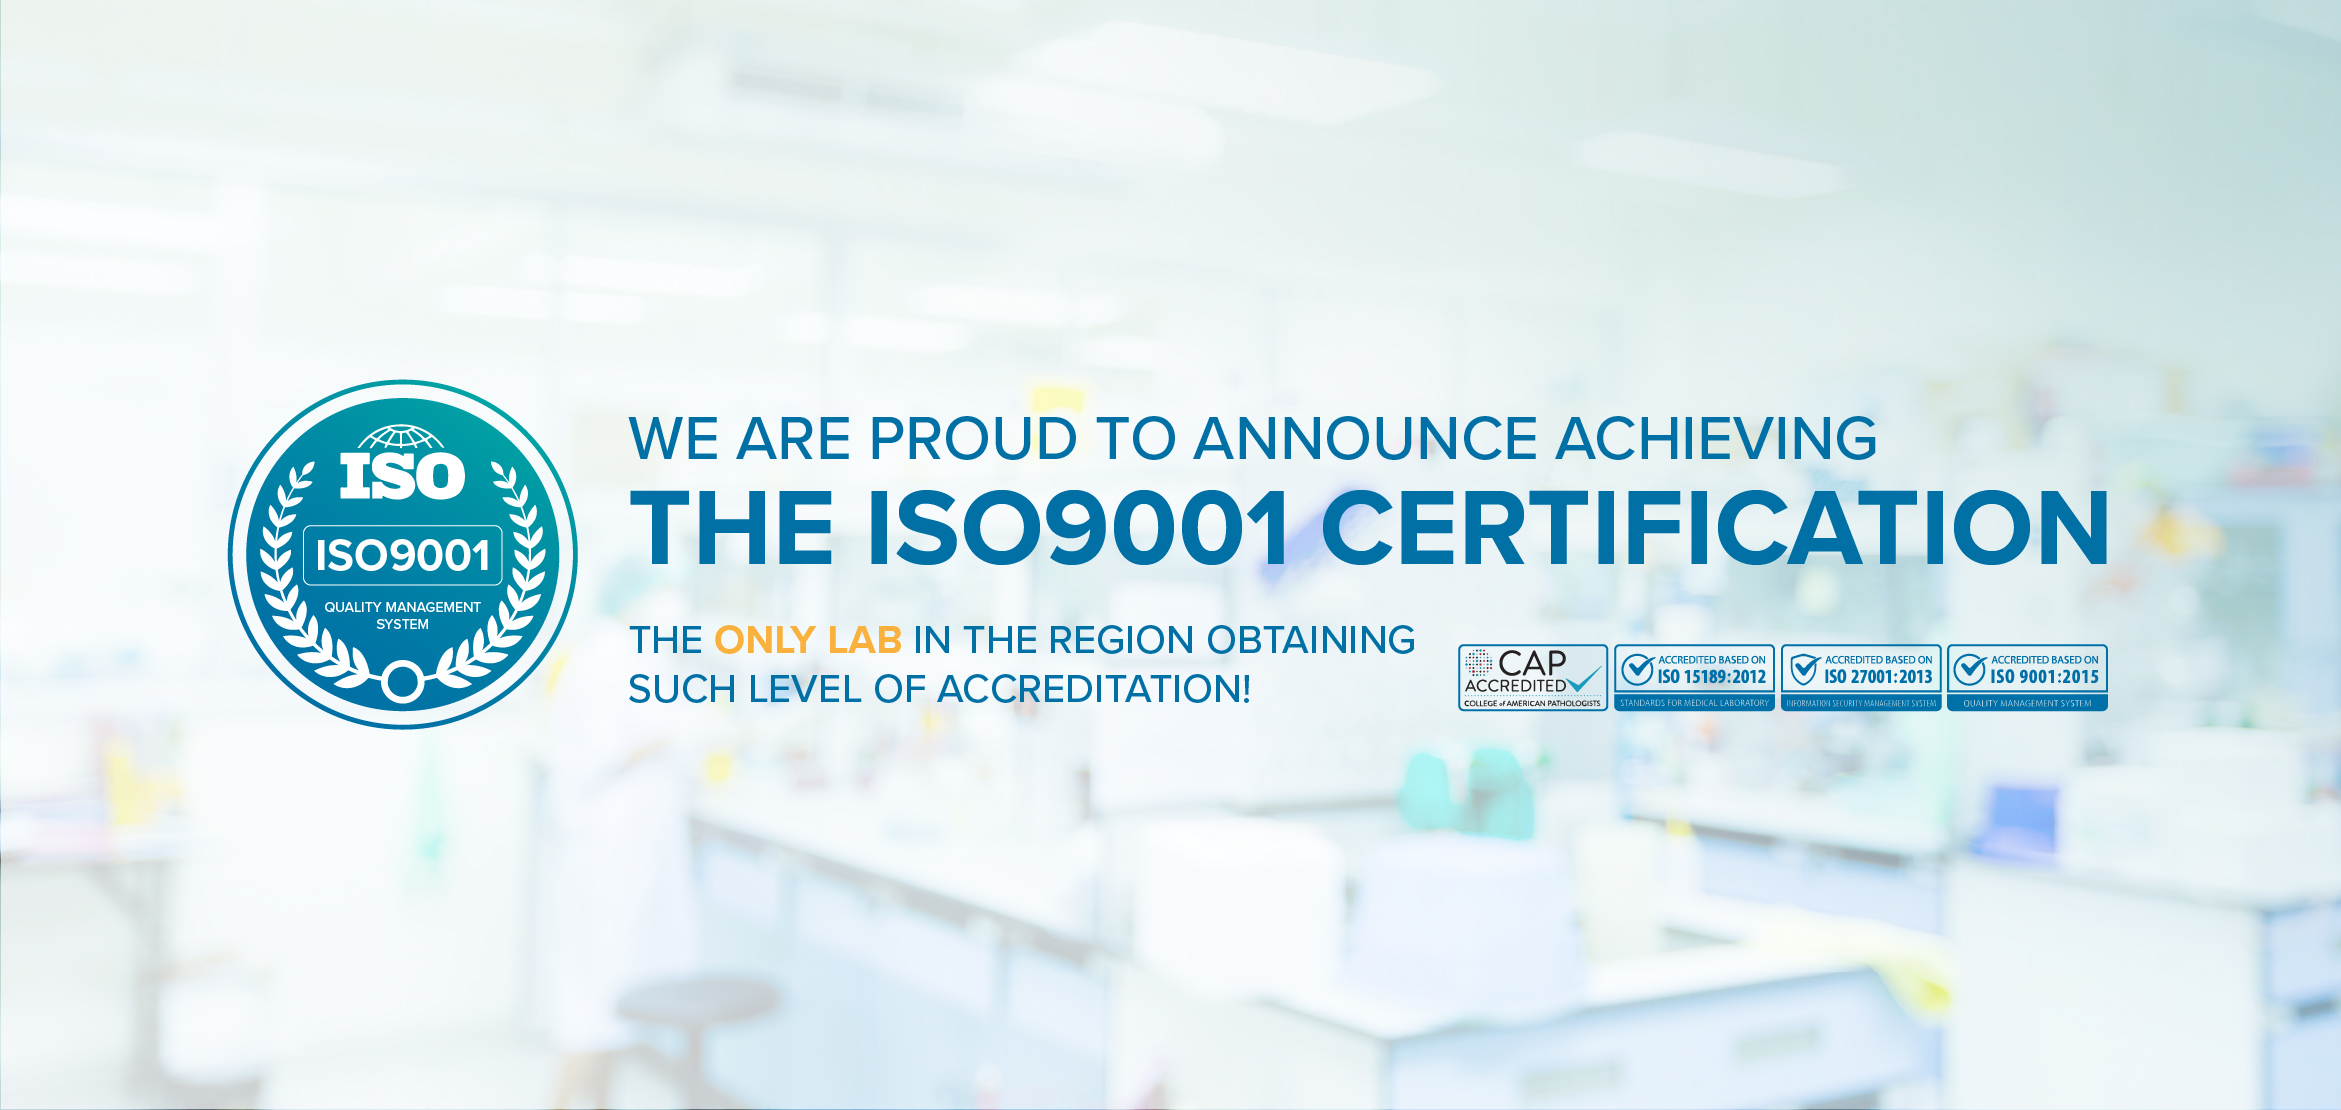 Agiomix Receives The International Standard for Quality Management System (ISO9001:2015) Accreditation: